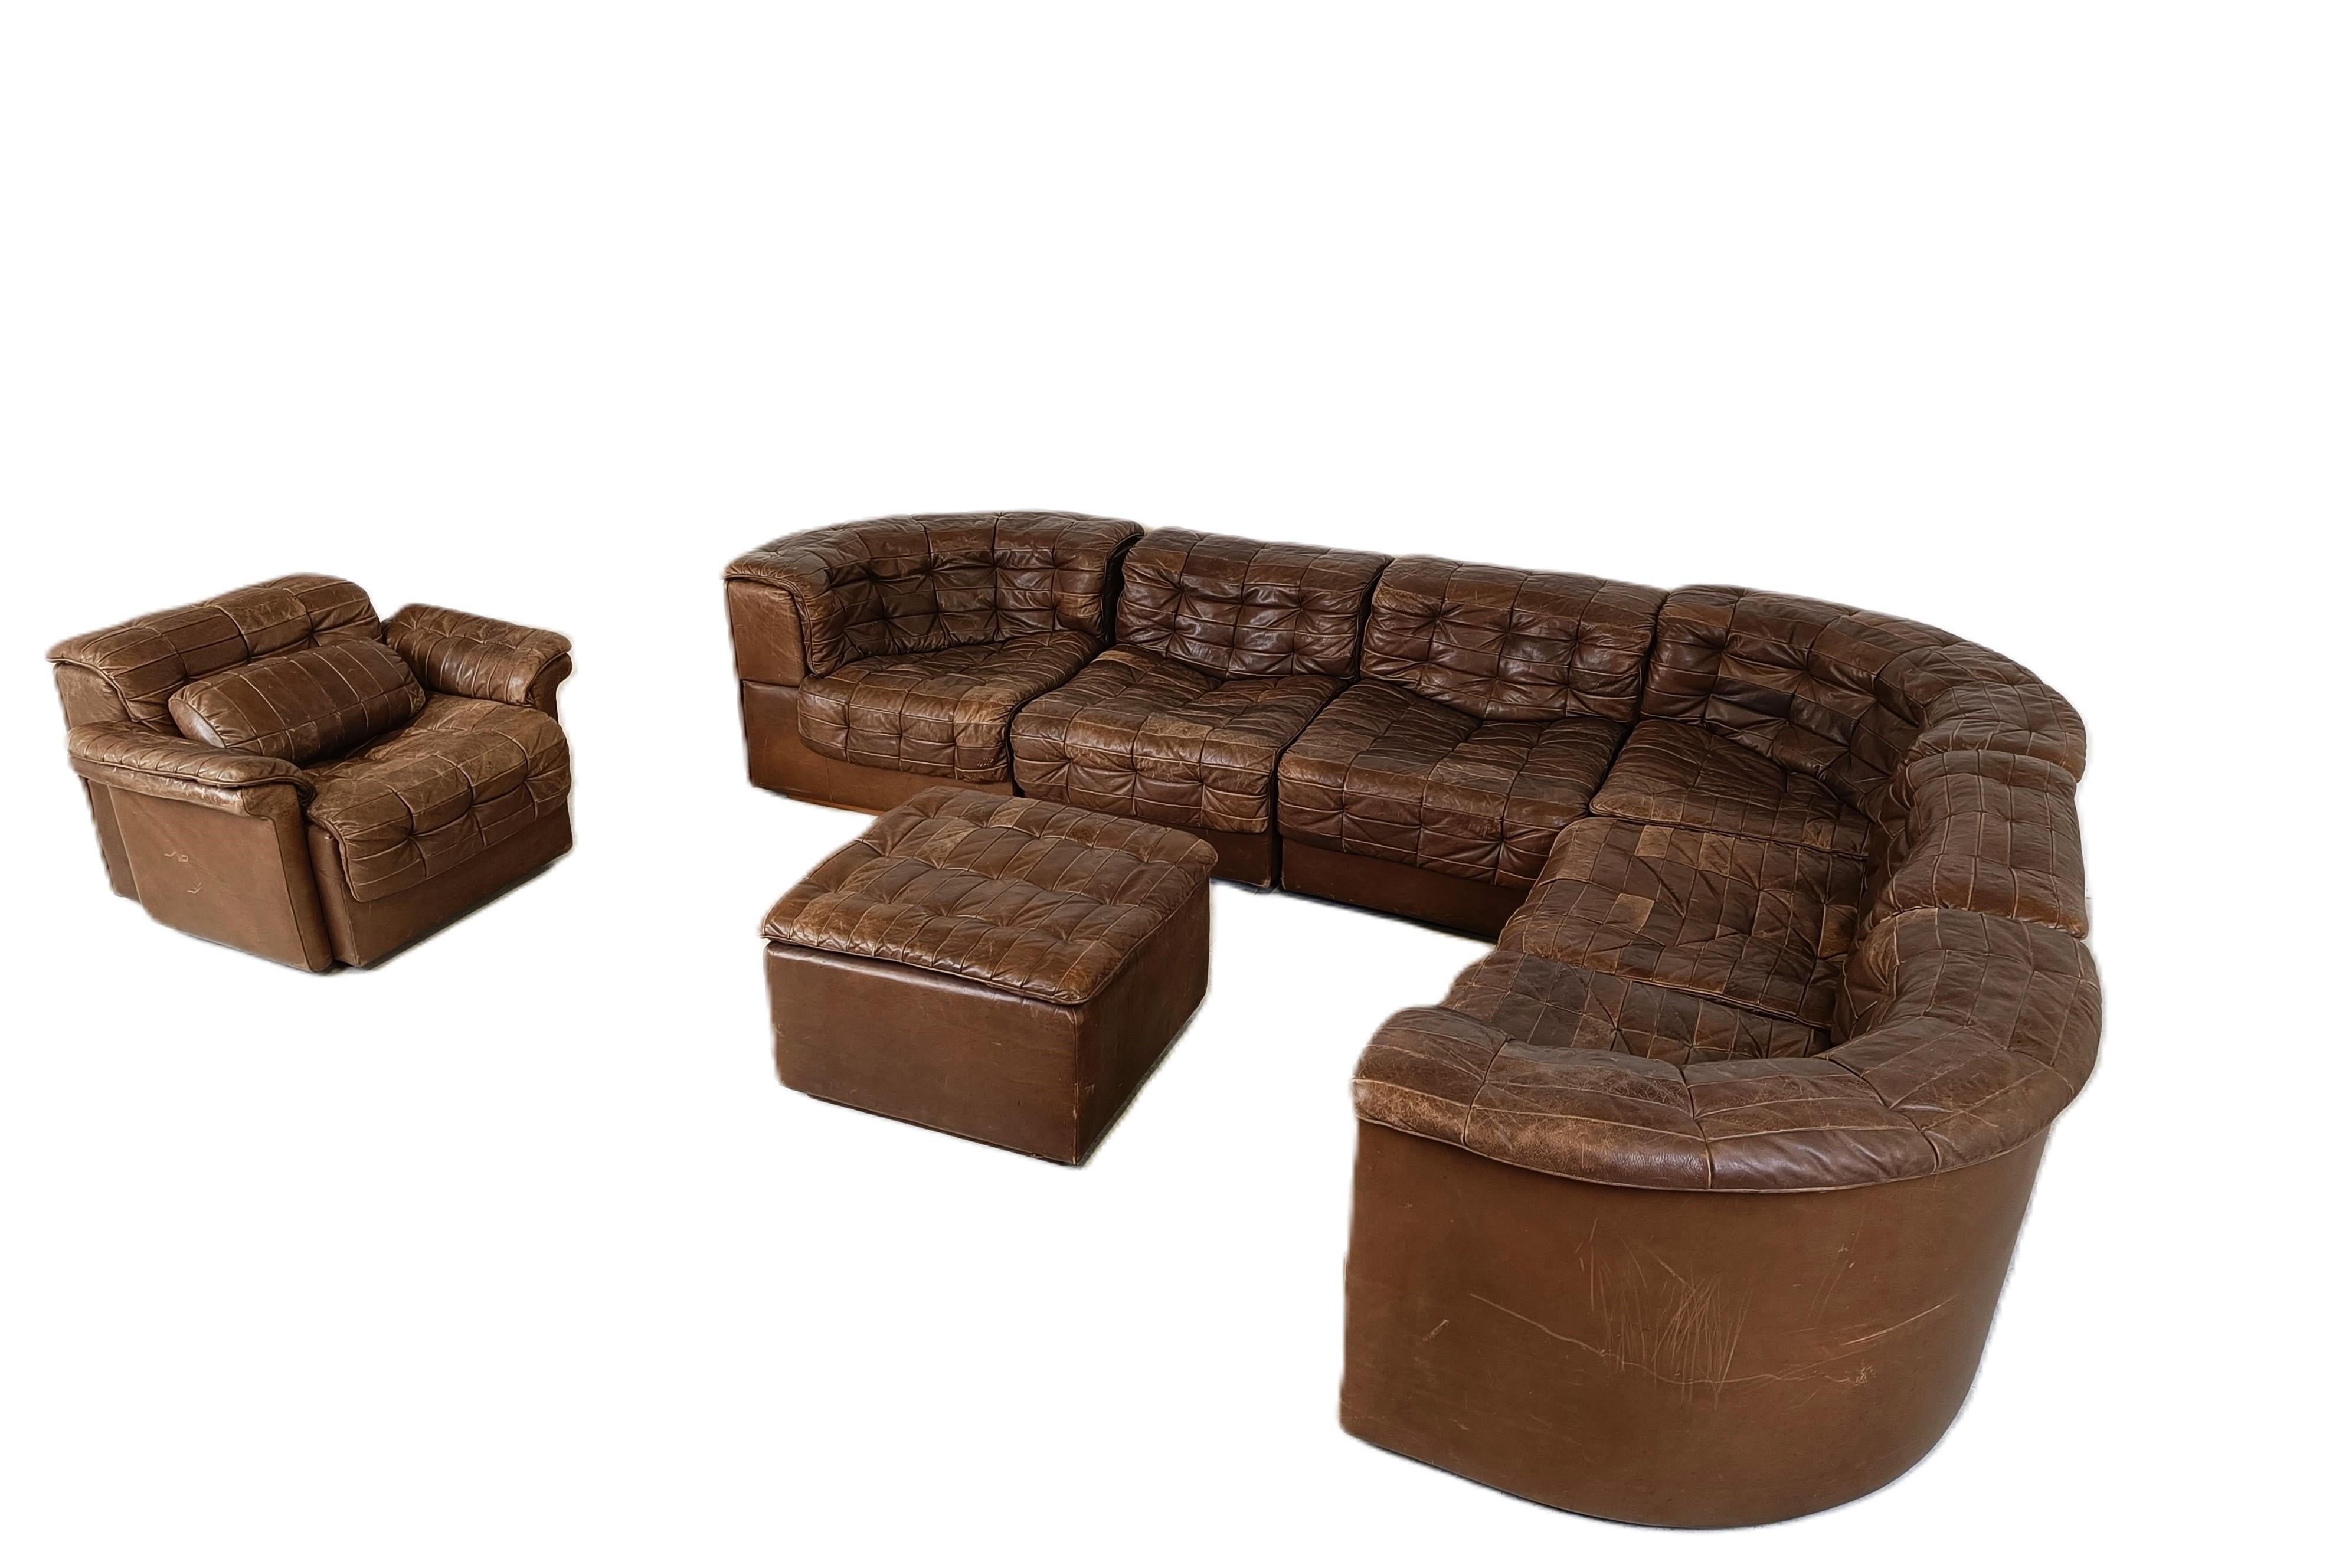 Mid century brown patchwork leather modular sofa by Desede.

Desede produced high quality leather sofas and is still producing today.

This DS11 model is quite rare to find.

This particular setup is great to fill up a living room thanks to the L